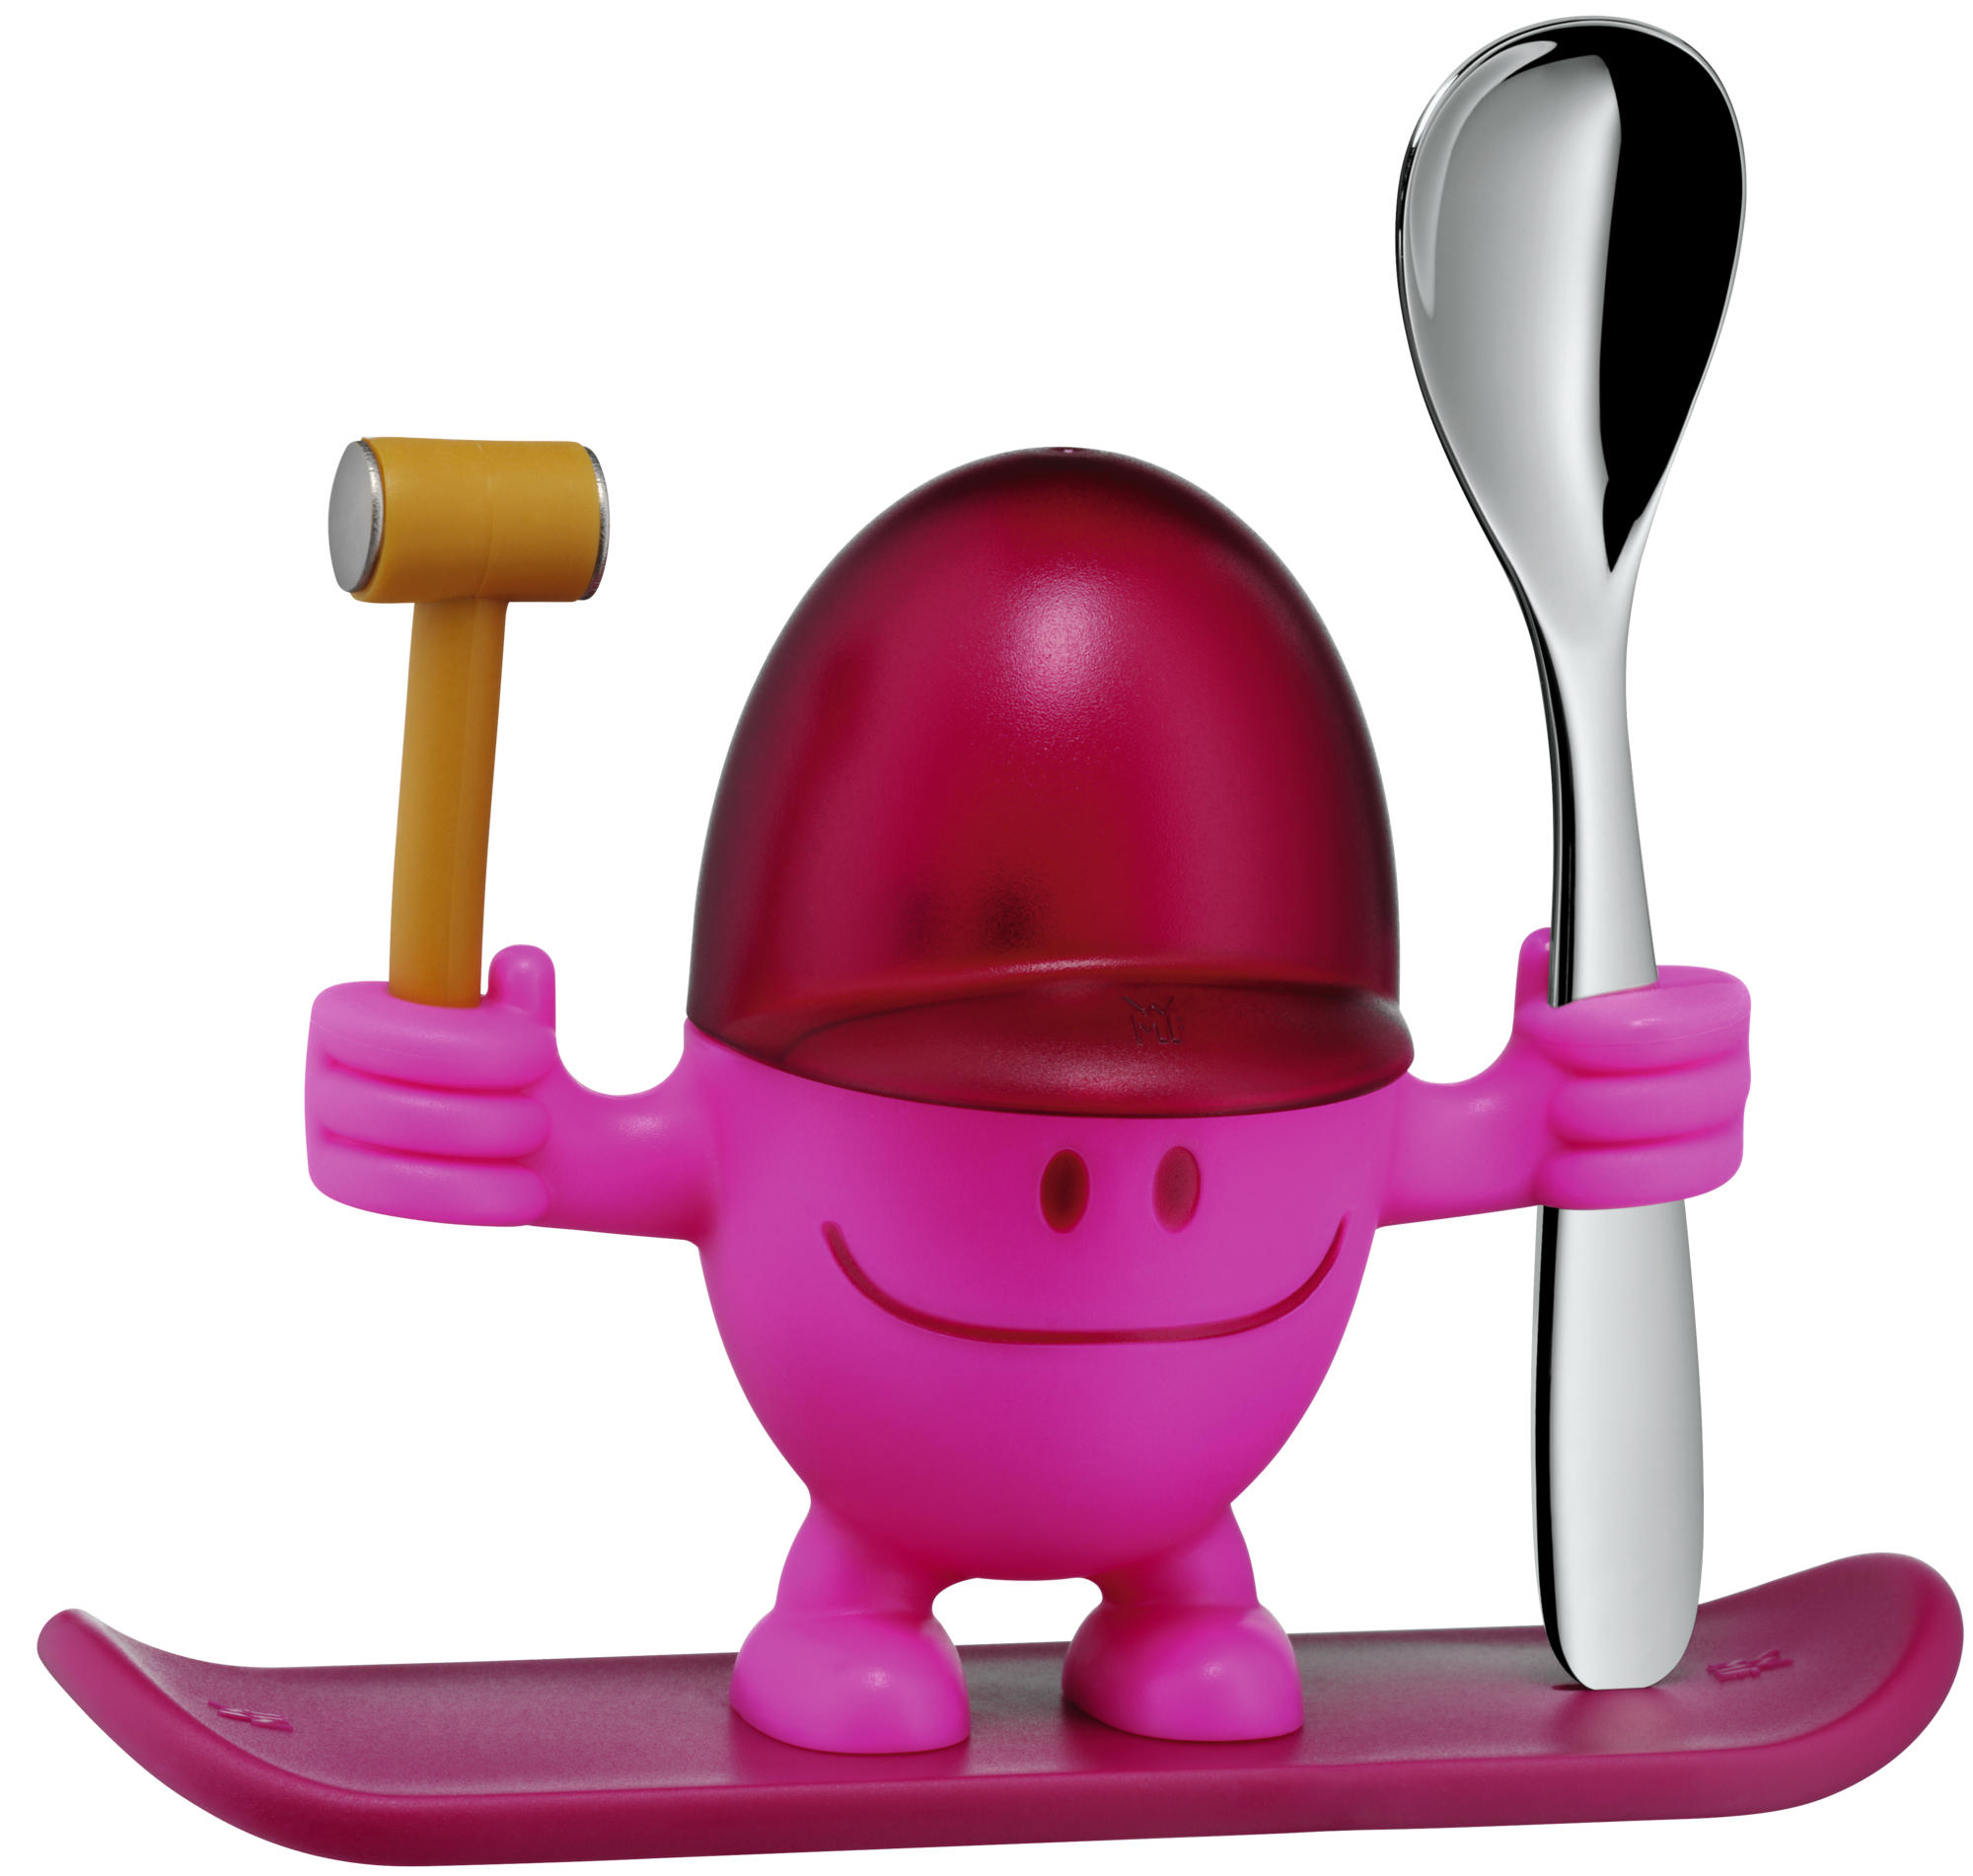 Egg cup set McEgg with spoon, pink 2-piece